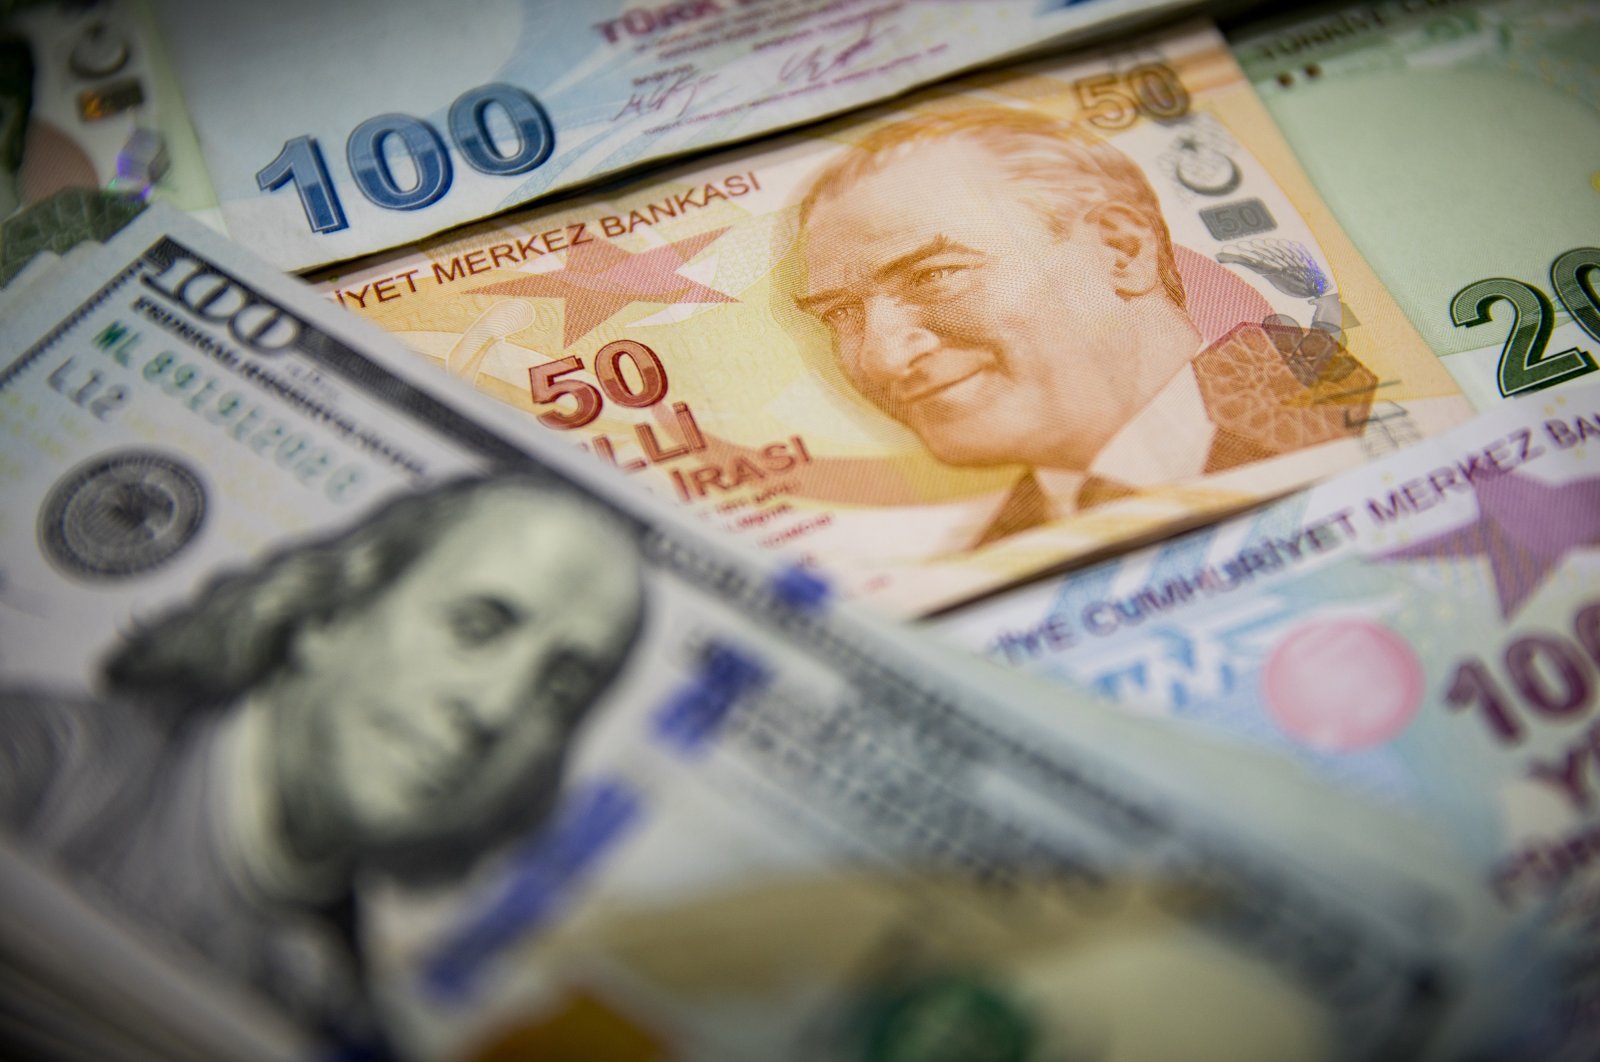 The Turkish lira and U.S. dollar banknotes are pictured together in a photo taken in Turkey. (Photo by Getty Images)